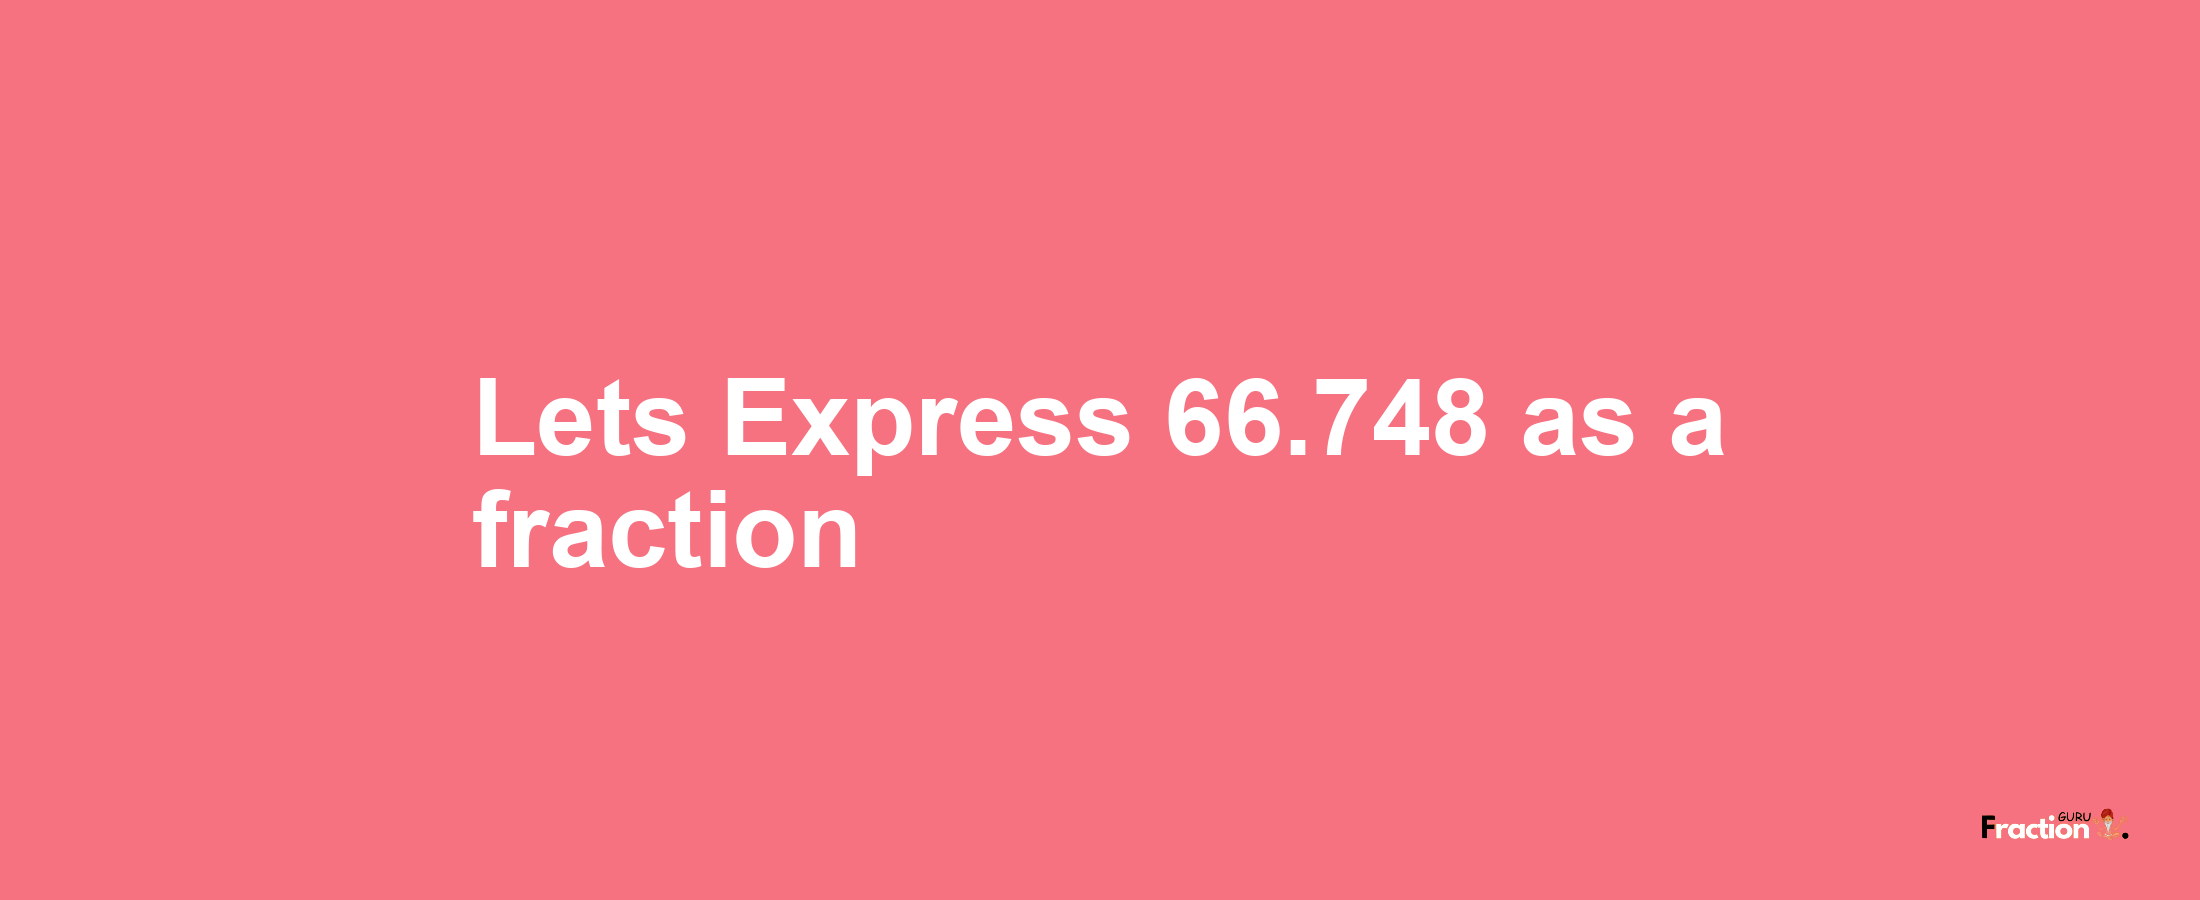 Lets Express 66.748 as afraction